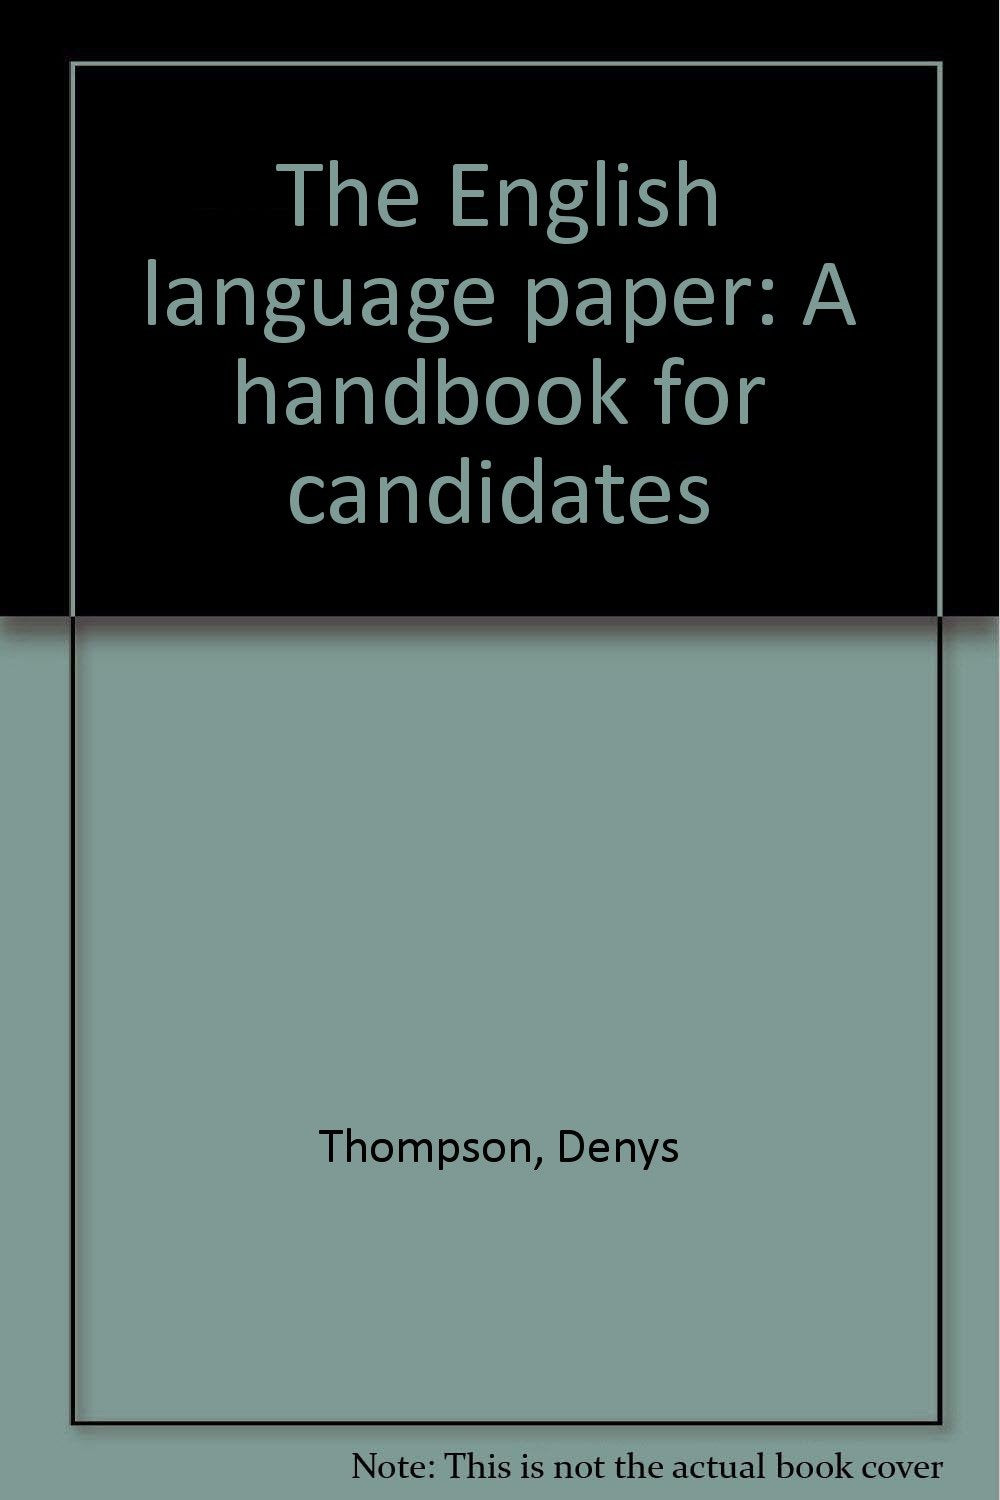 The English language paper: A handbook for candidates